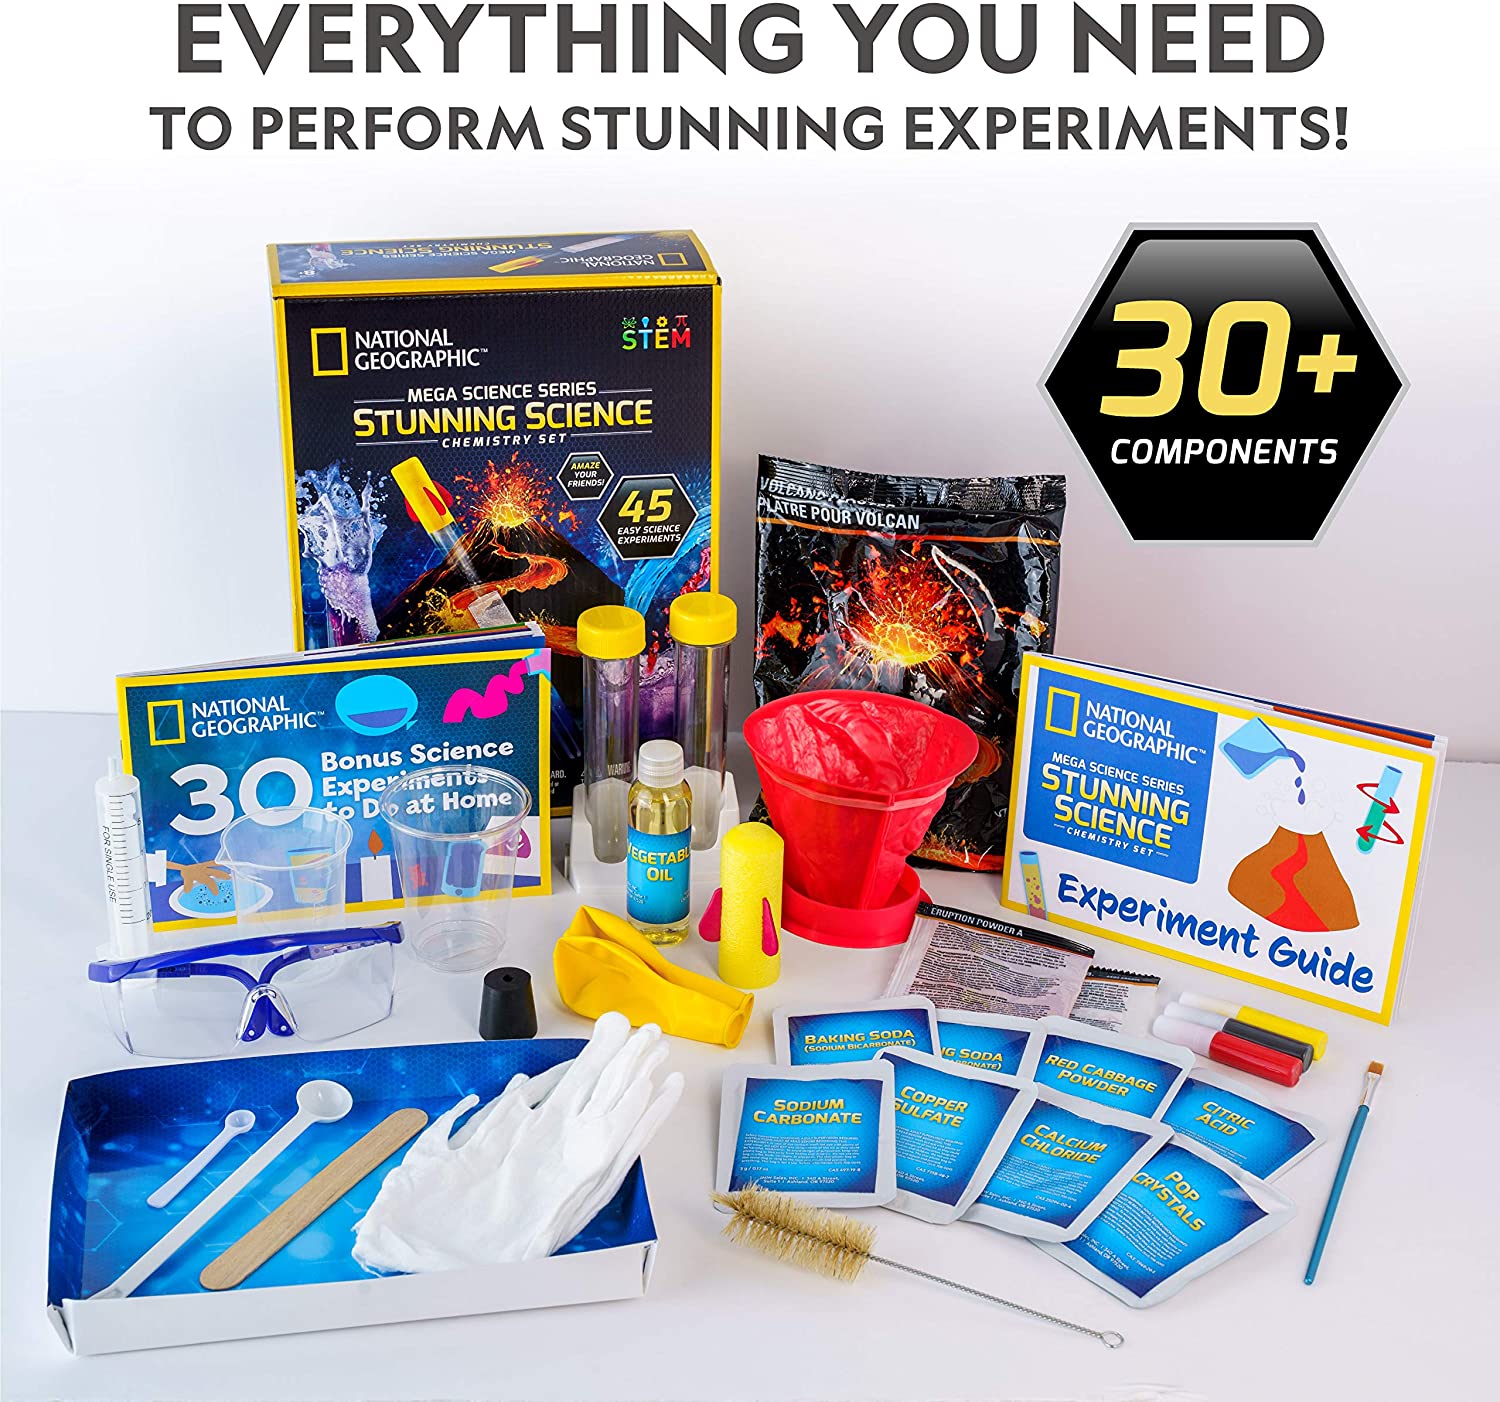 Target's National Geographic science kit deals are heating up with